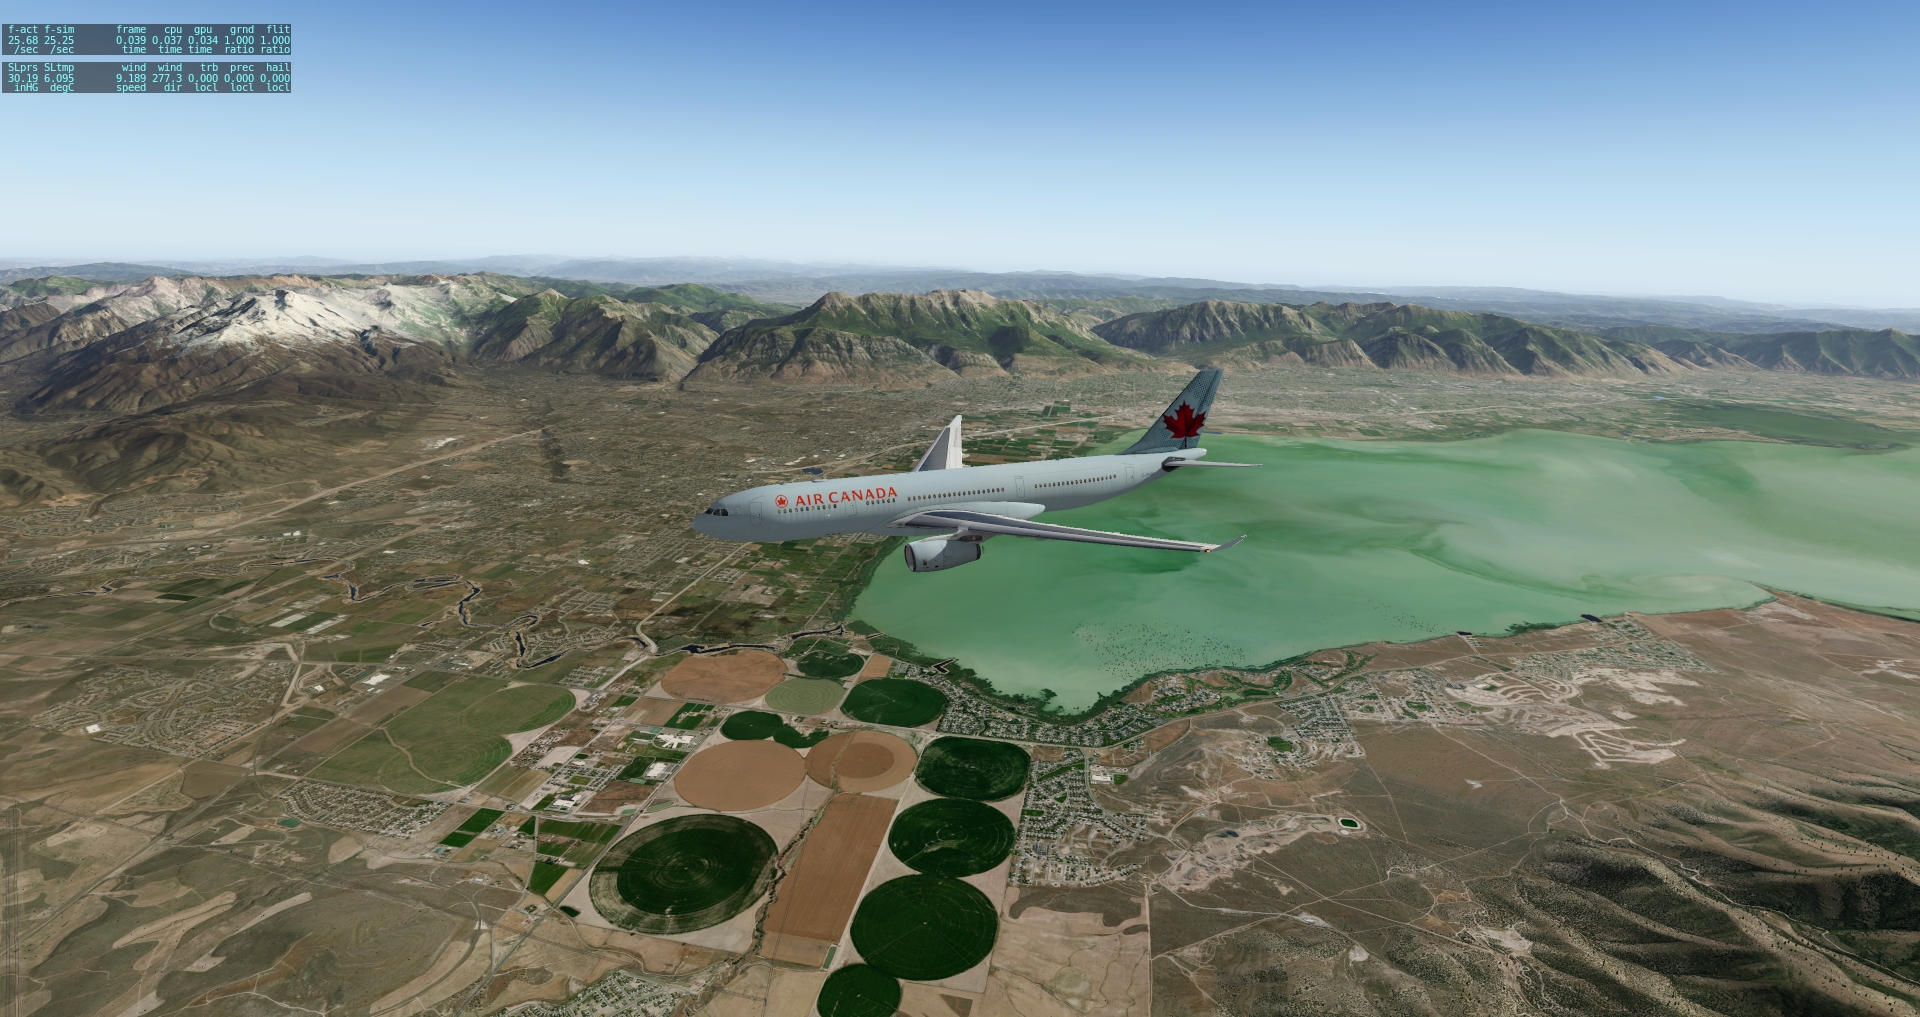 On approach to KSLC over lake Utah